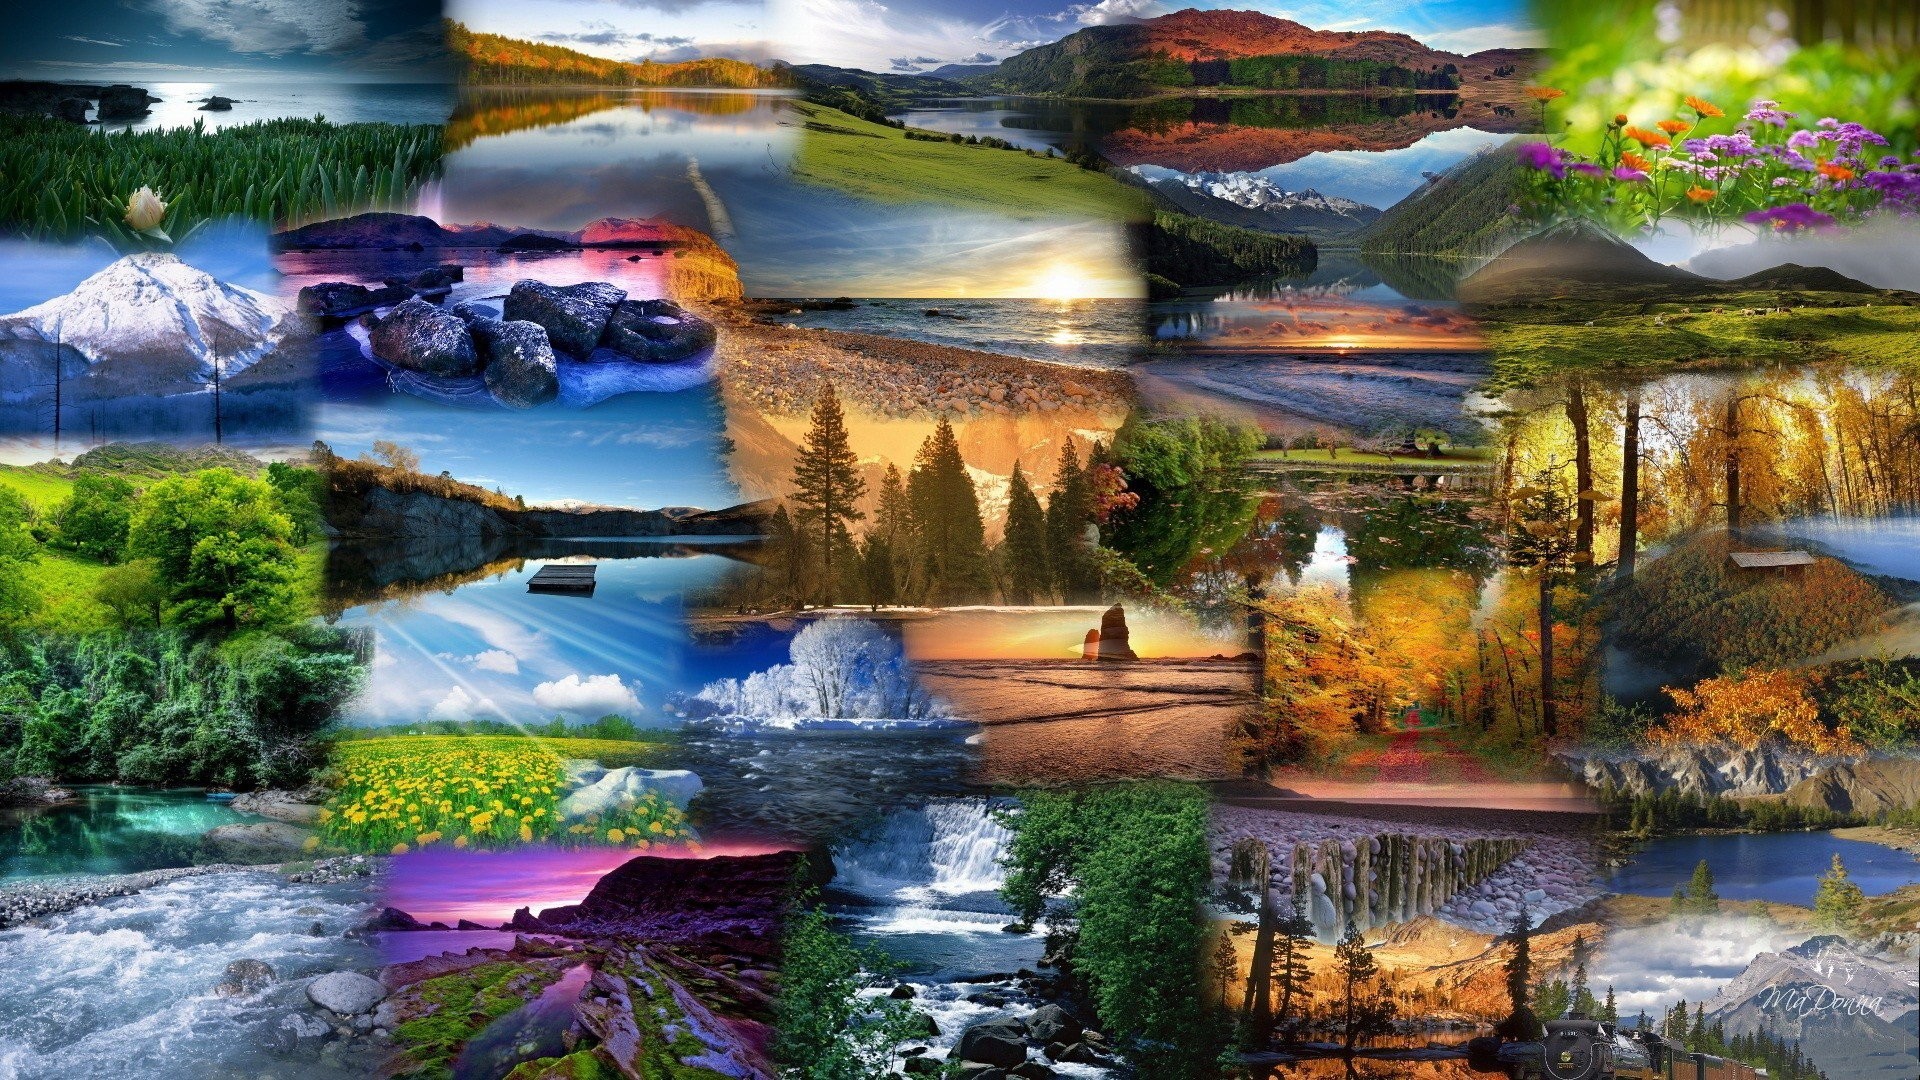 HD Wallpaper Background ID409996. Photography Collage